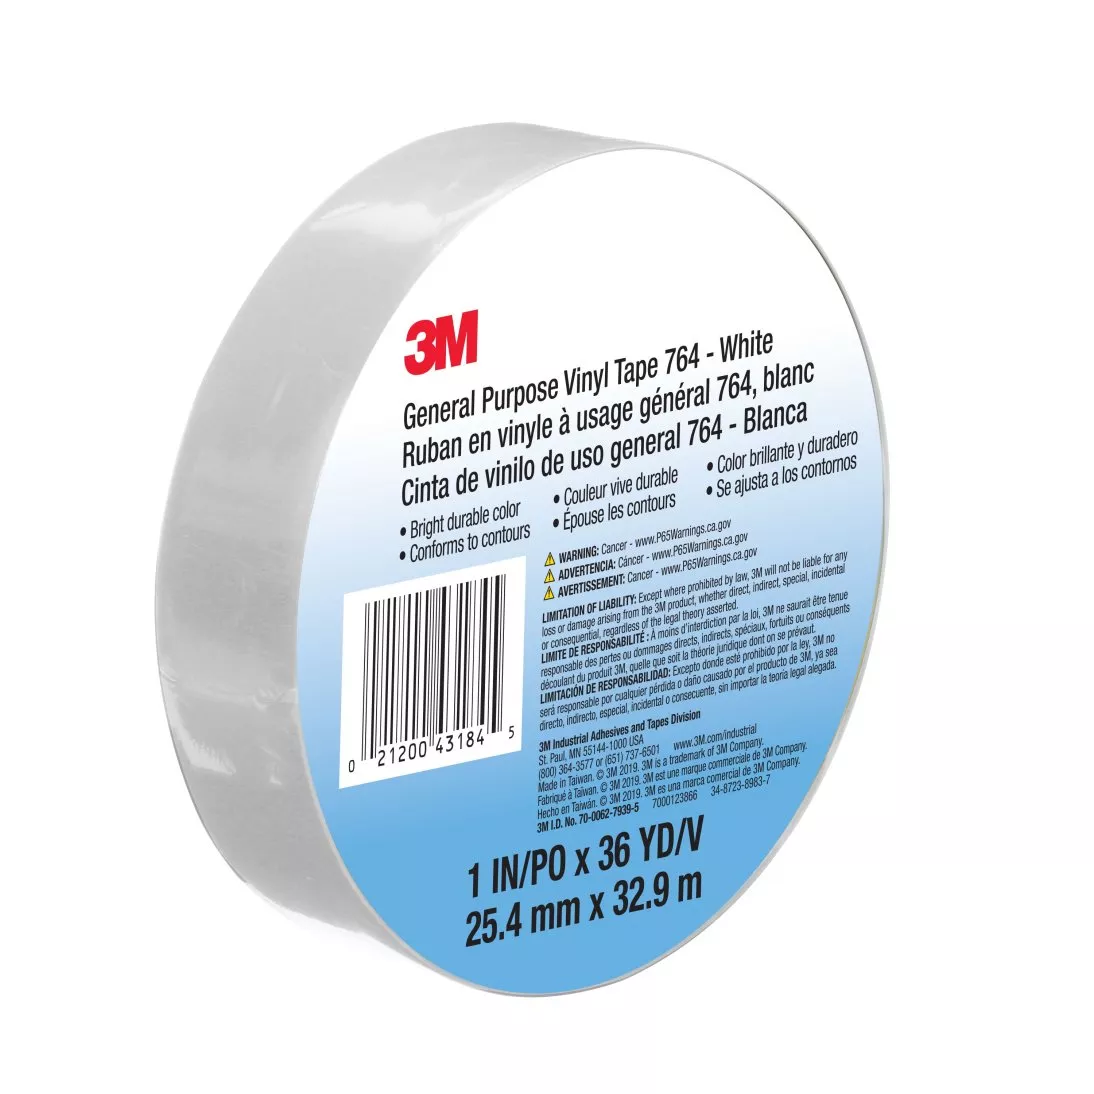 3M™ General Purpose Vinyl Tape 764, White, 1 in x 36 yd, 5 mil, 36 Roll/Case, Individually Wrapped Conveniently Packaged